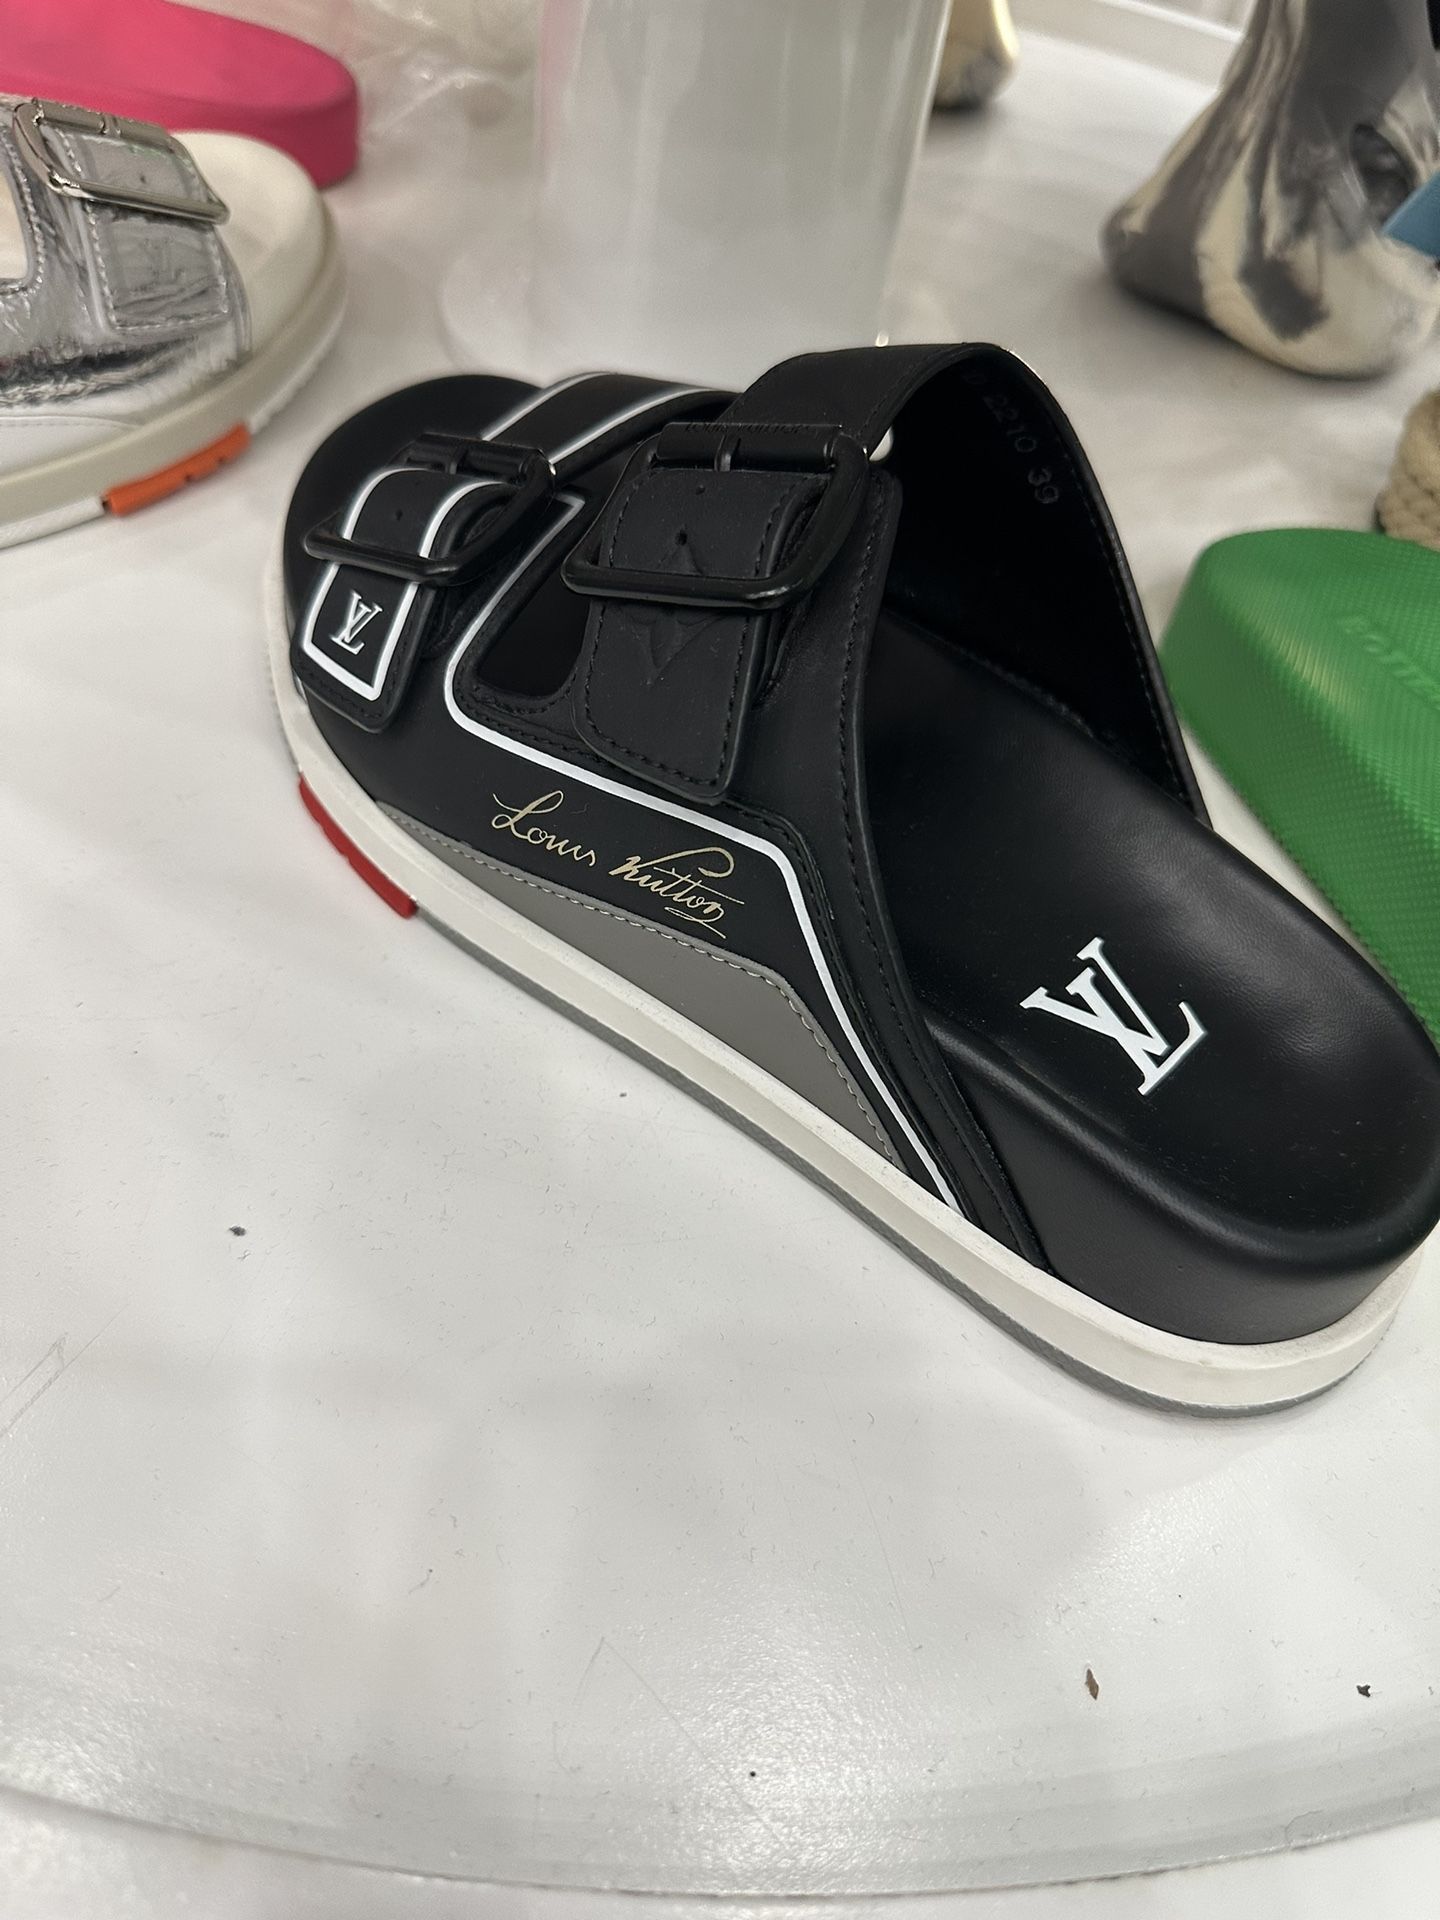 Lady Louis Vuitton Slides for Sale in Bronx, NY - OfferUp